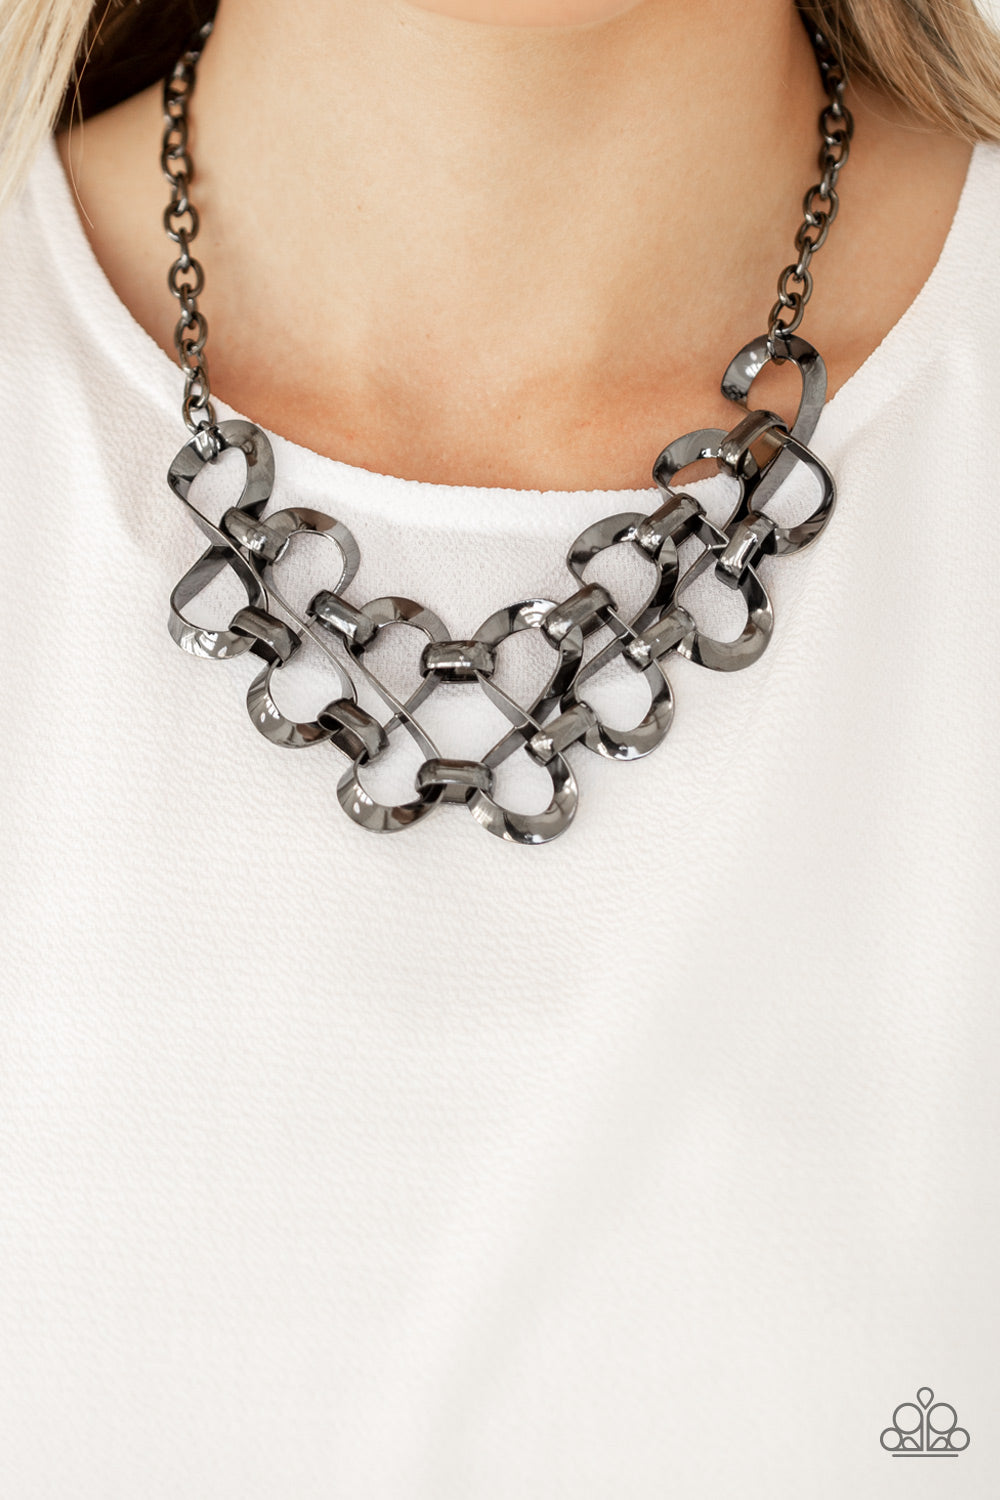 Work, Play, and Slay Black Encore Necklace - Paparazzi Accessories